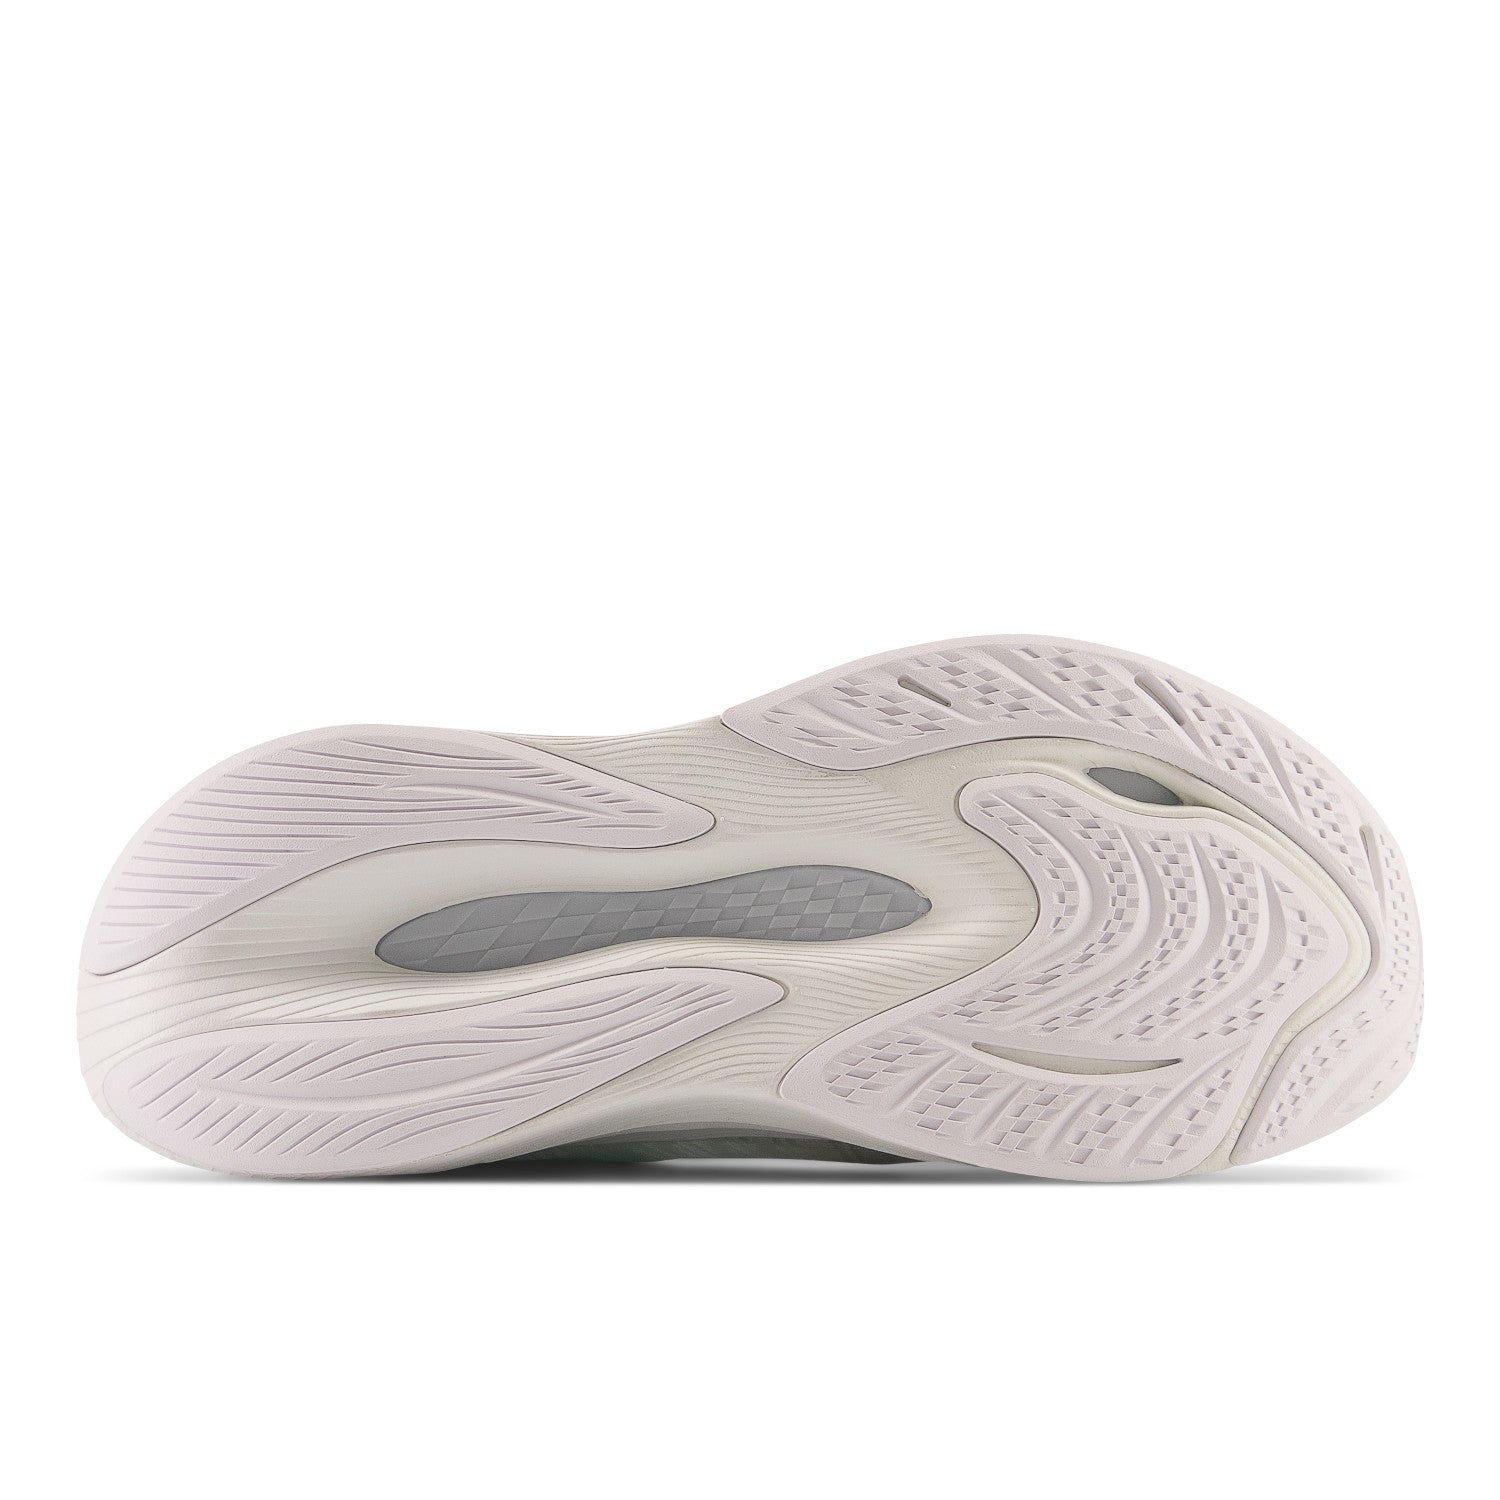 New Balance FuelCell Propel WFCPRLW4 Women's 7